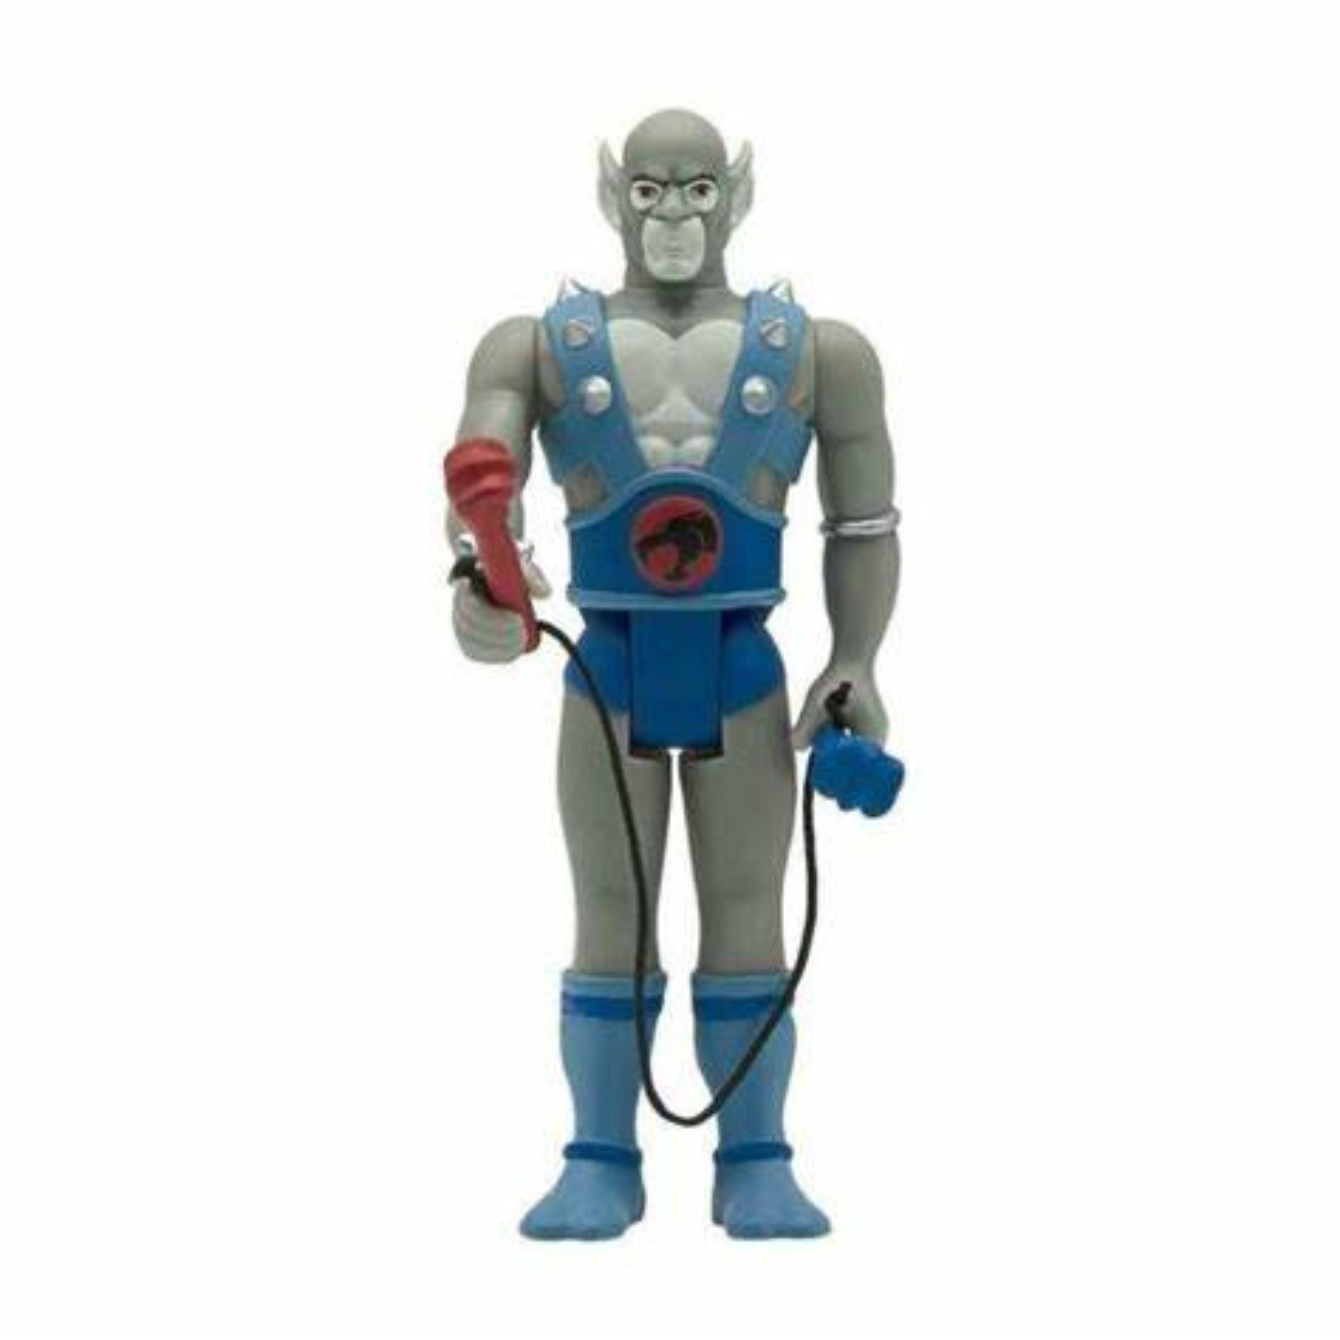 Super7 ReAction Thundercats Wave 1 Panthro 3.75 Inch Action Figure